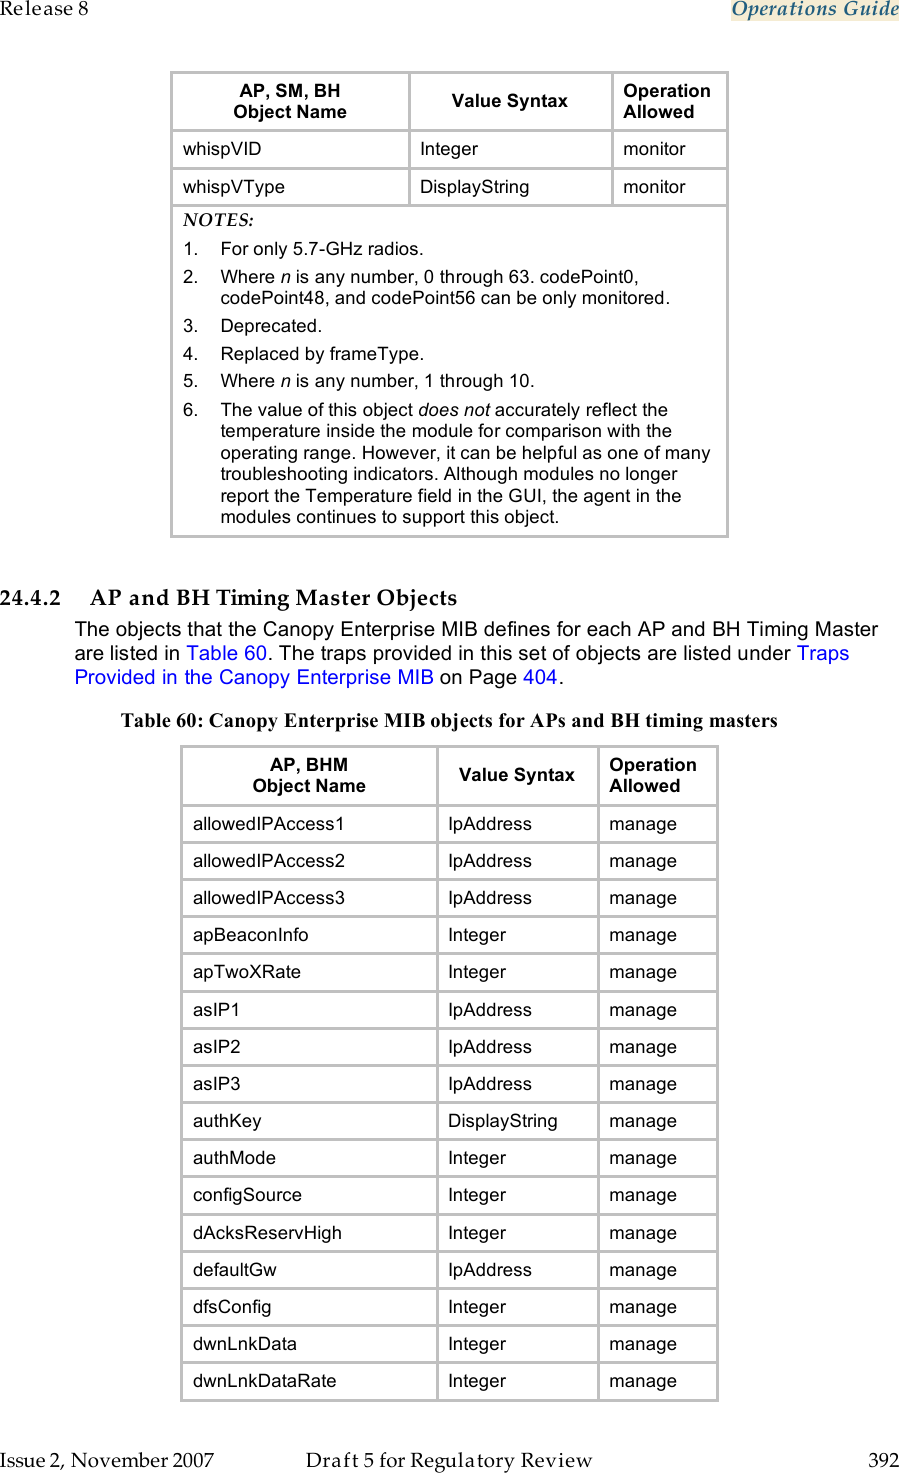 Release 8    Operations Guide   Issue 2, November 2007  Draft 5 for Regulatory Review  392     AP, SM, BH Object Name Value Syntax Operation  Allowed whispVID Integer monitor whispVType DisplayString monitor NOTES: 1.  For only 5.7-GHz radios. 2.  Where n is any number, 0 through 63. codePoint0, codePoint48, and codePoint56 can be only monitored. 3.  Deprecated. 4.  Replaced by frameType. 5.  Where n is any number, 1 through 10. 6.  The value of this object does not accurately reflect the temperature inside the module for comparison with the operating range. However, it can be helpful as one of many troubleshooting indicators. Although modules no longer report the Temperature field in the GUI, the agent in the modules continues to support this object.   24.4.2 AP and BH Timing Master Objects The objects that the Canopy Enterprise MIB defines for each AP and BH Timing Master are listed in Table 60. The traps provided in this set of objects are listed under Traps Provided in the Canopy Enterprise MIB on Page 404. Table 60: Canopy Enterprise MIB objects for APs and BH timing masters AP, BHM Object Name Value Syntax Operation Allowed allowedIPAccess1 IpAddress manage allowedIPAccess2 IpAddress manage allowedIPAccess3 IpAddress manage apBeaconInfo Integer manage apTwoXRate Integer manage asIP1 IpAddress manage asIP2 IpAddress manage asIP3 IpAddress manage authKey DisplayString manage authMode Integer manage configSource Integer manage dAcksReservHigh Integer manage defaultGw IpAddress manage dfsConfig Integer manage dwnLnkData Integer manage dwnLnkDataRate Integer manage 